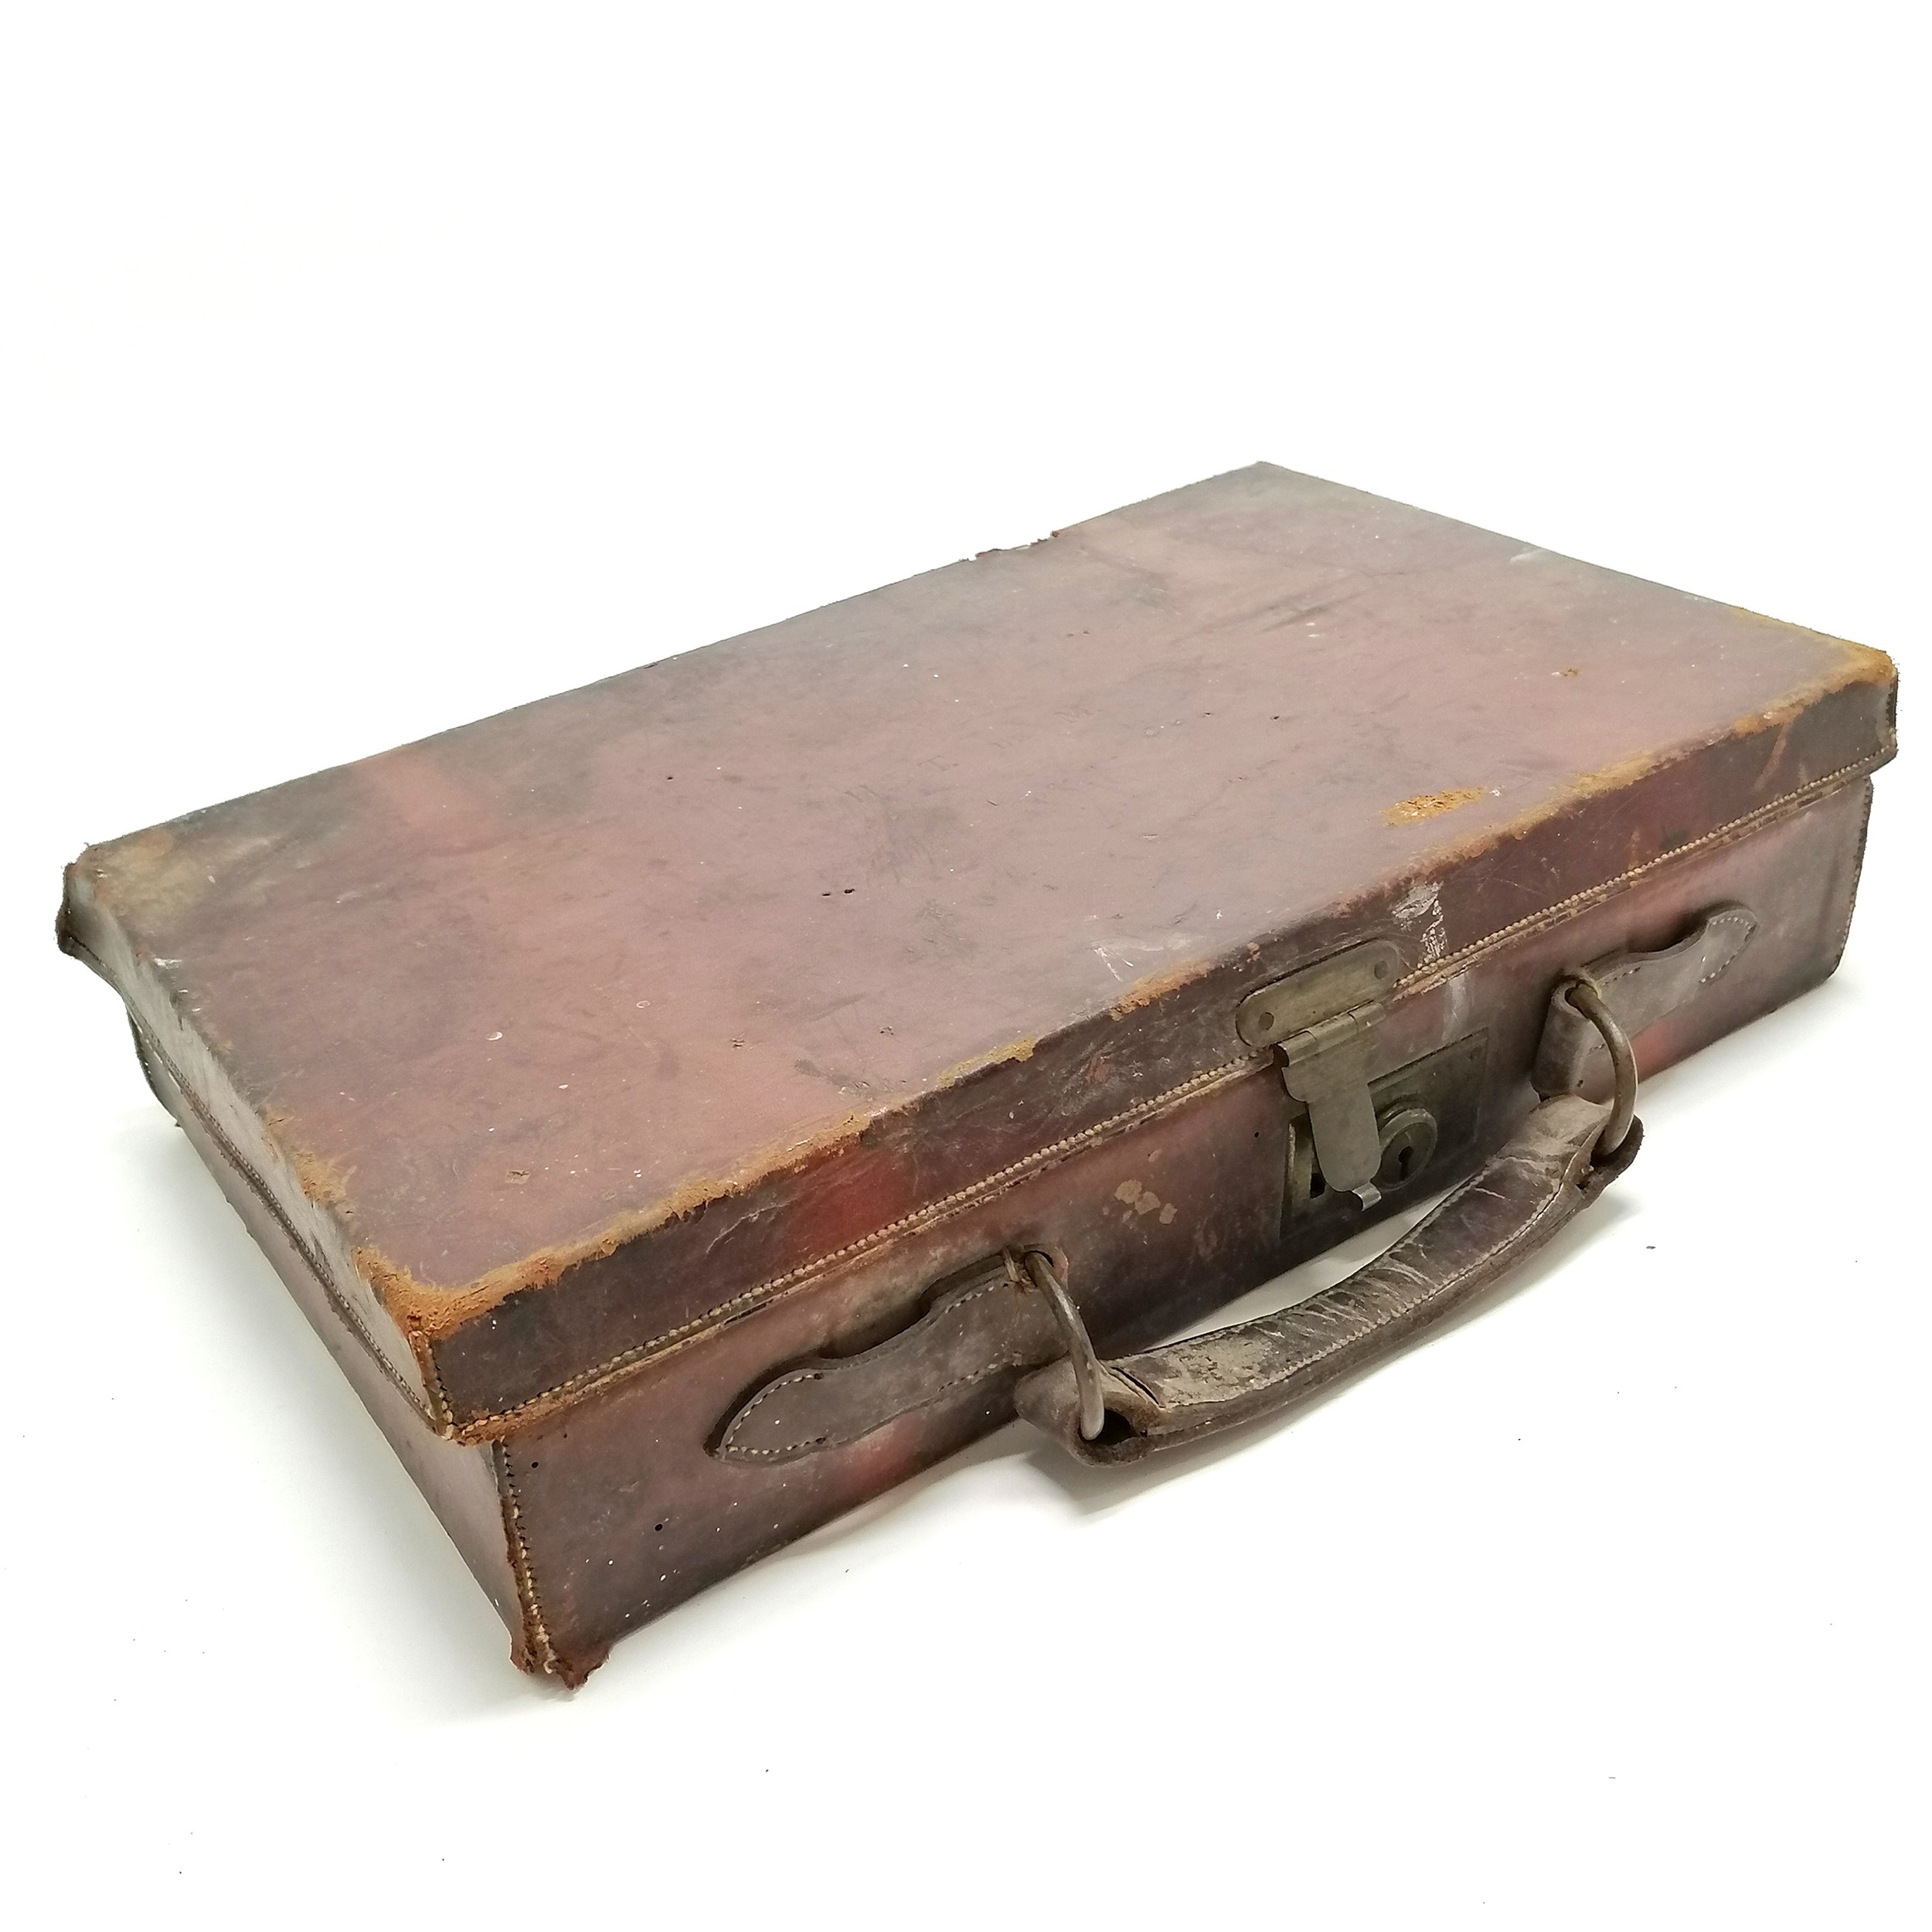 Antique leather covered cartridge case with Belgian label to interior - 41cm x 35cm x 10cm high t/ - Image 6 of 6